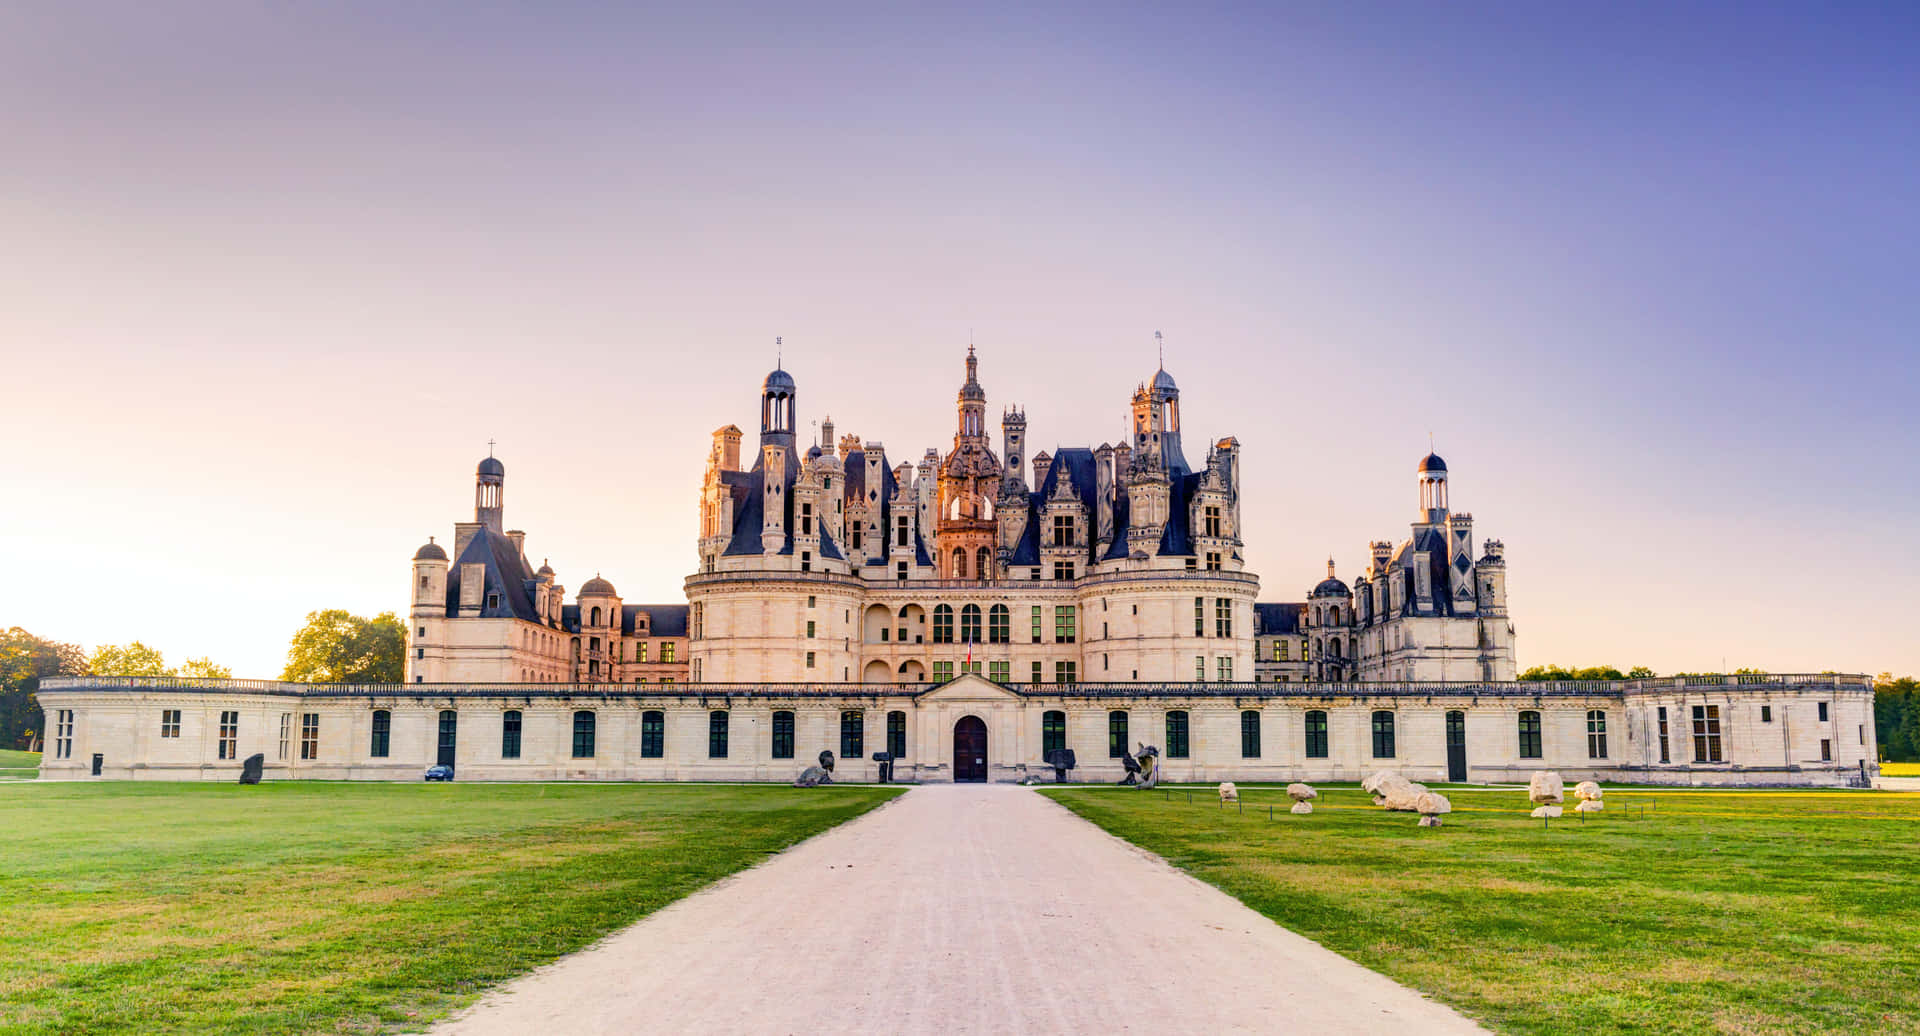 Chateau De Chambord Filtered Photography Wallpaper